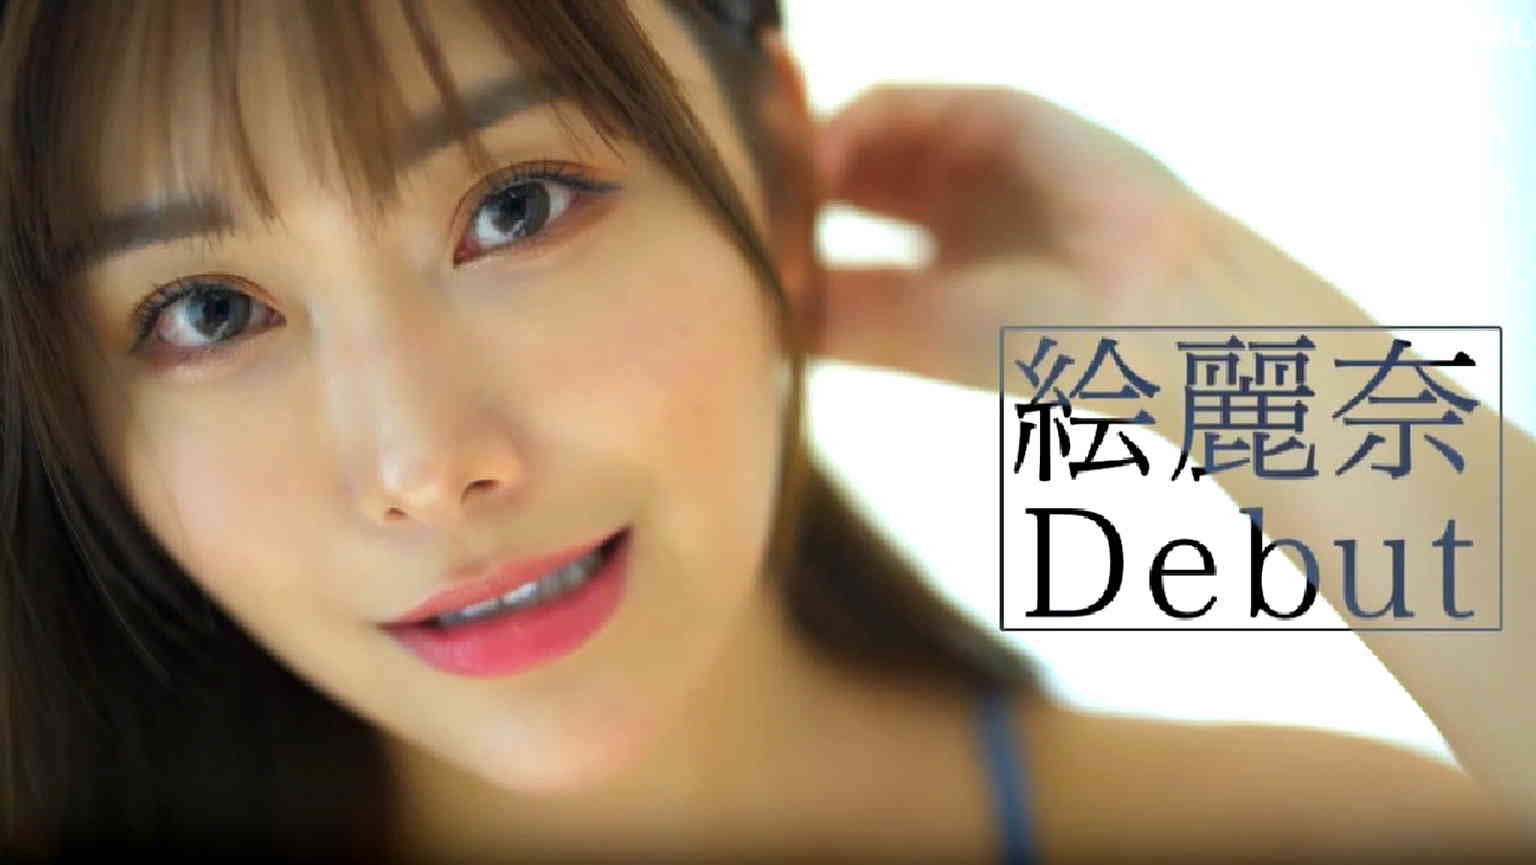 Hong Kong-born actress is first to debut in Japan’s adult video industry